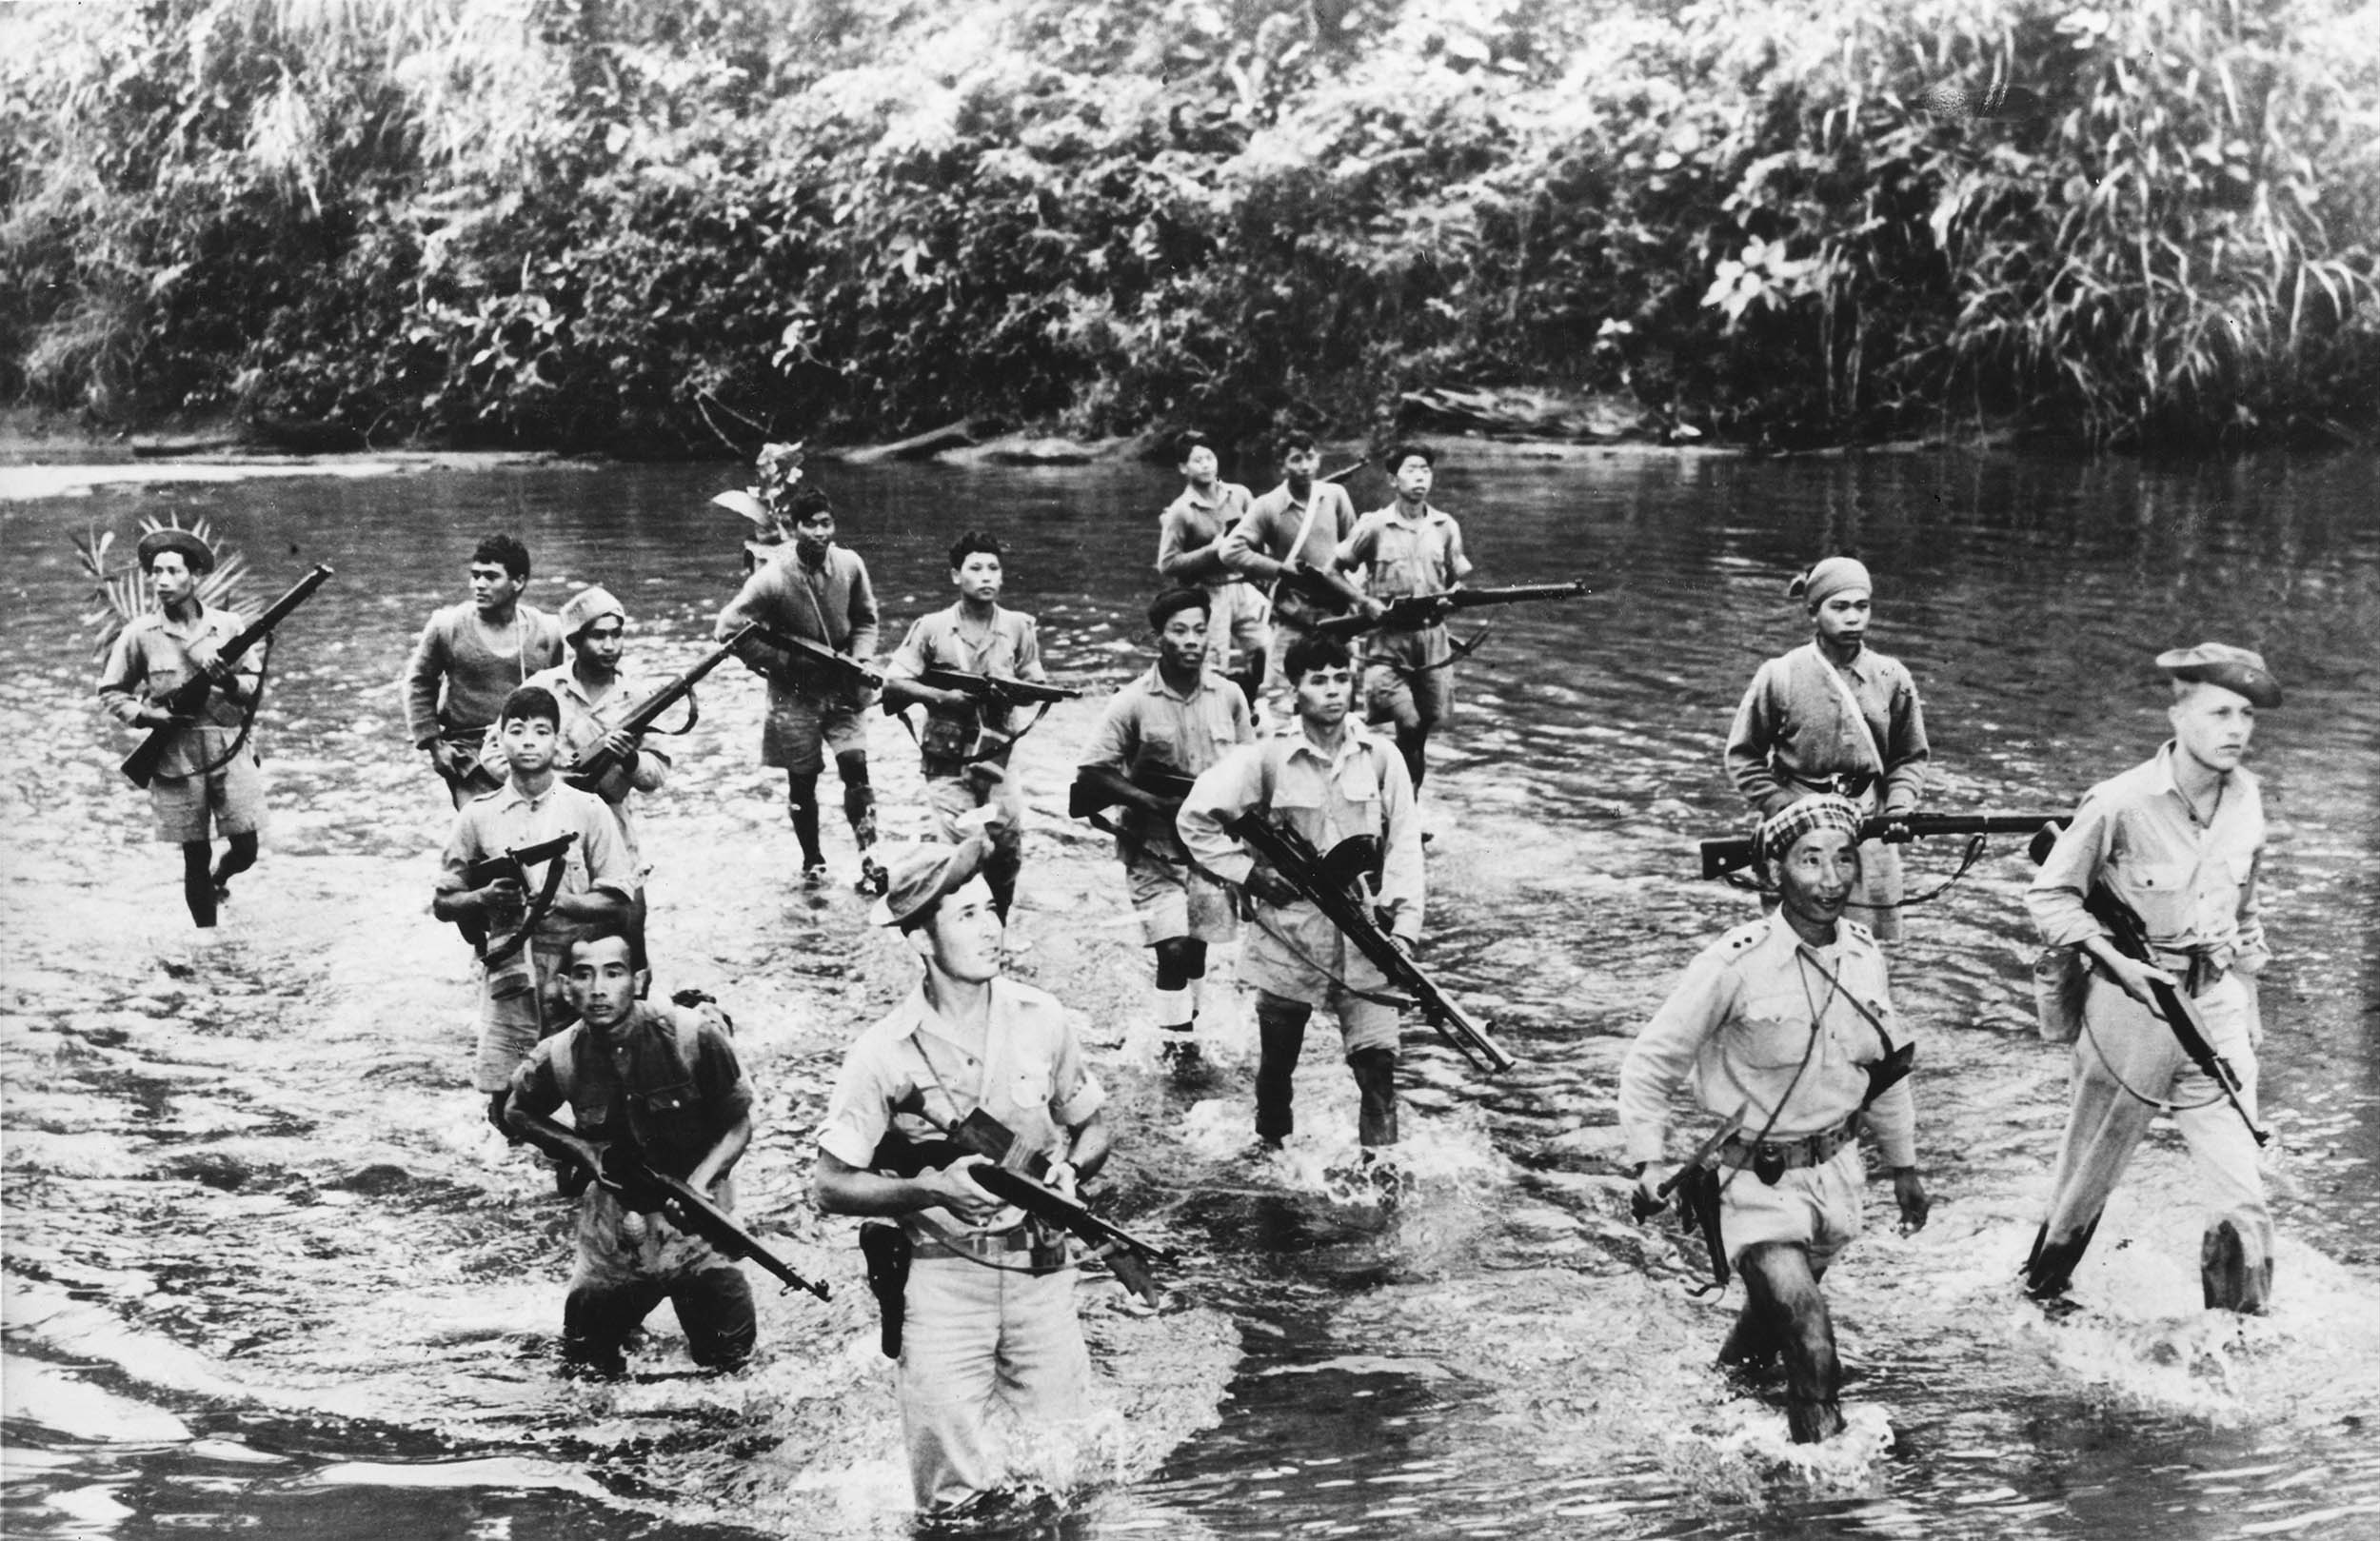 Scouting detachment of armed Burmese patriot fighters, accompanied by two American Soldiers, cautiously wades through jungle stream in Northern Burma, circa 1944 (Chronicle/Alamy)